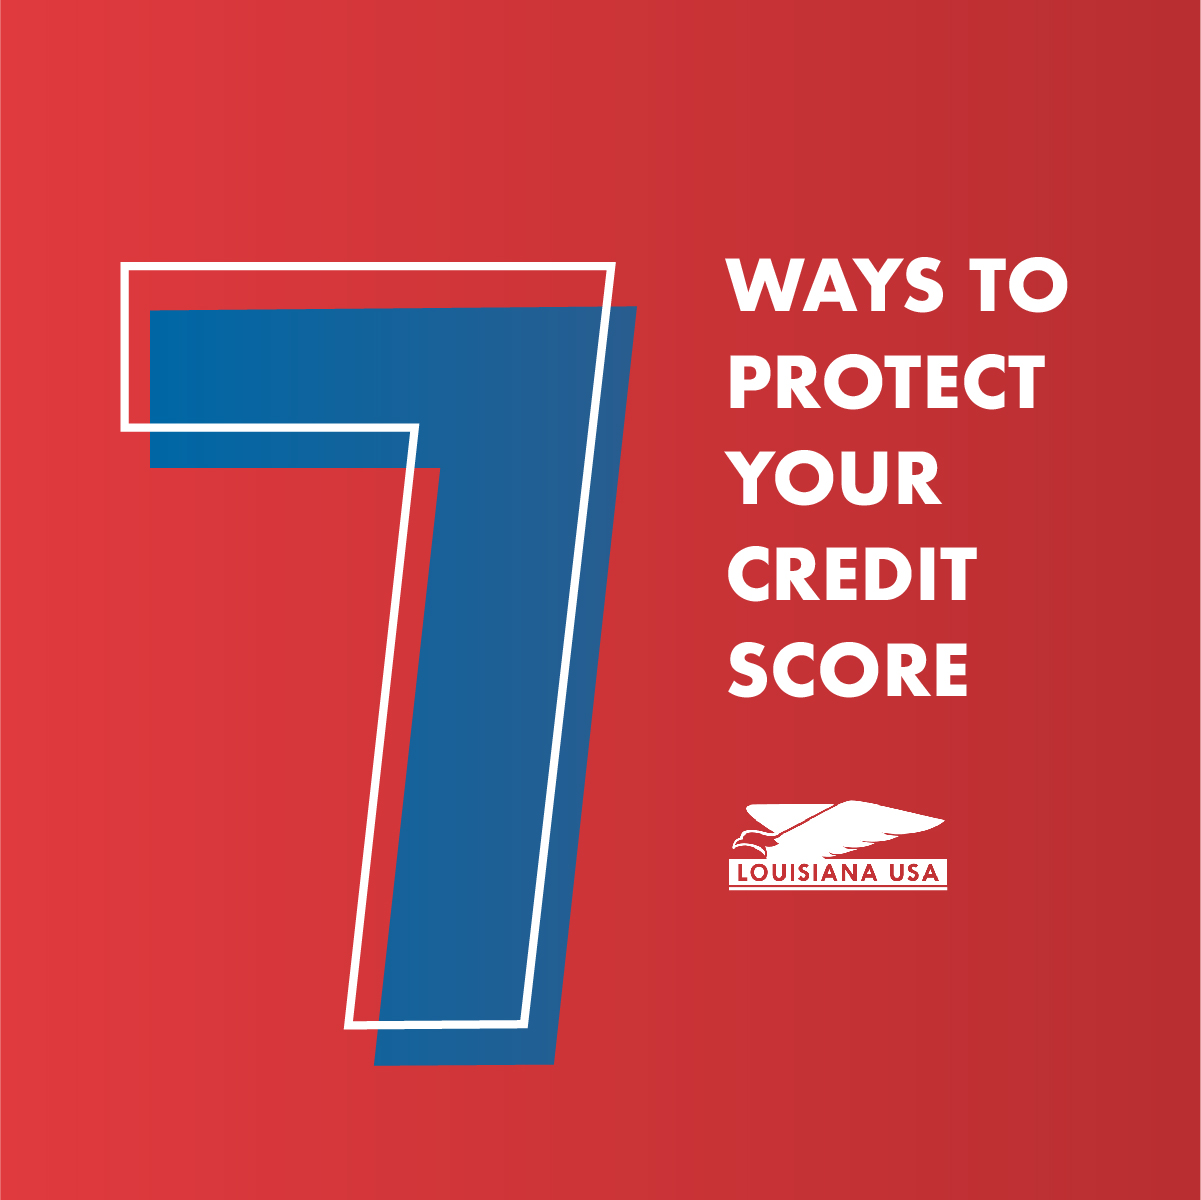 How To Protect Your Credit Score